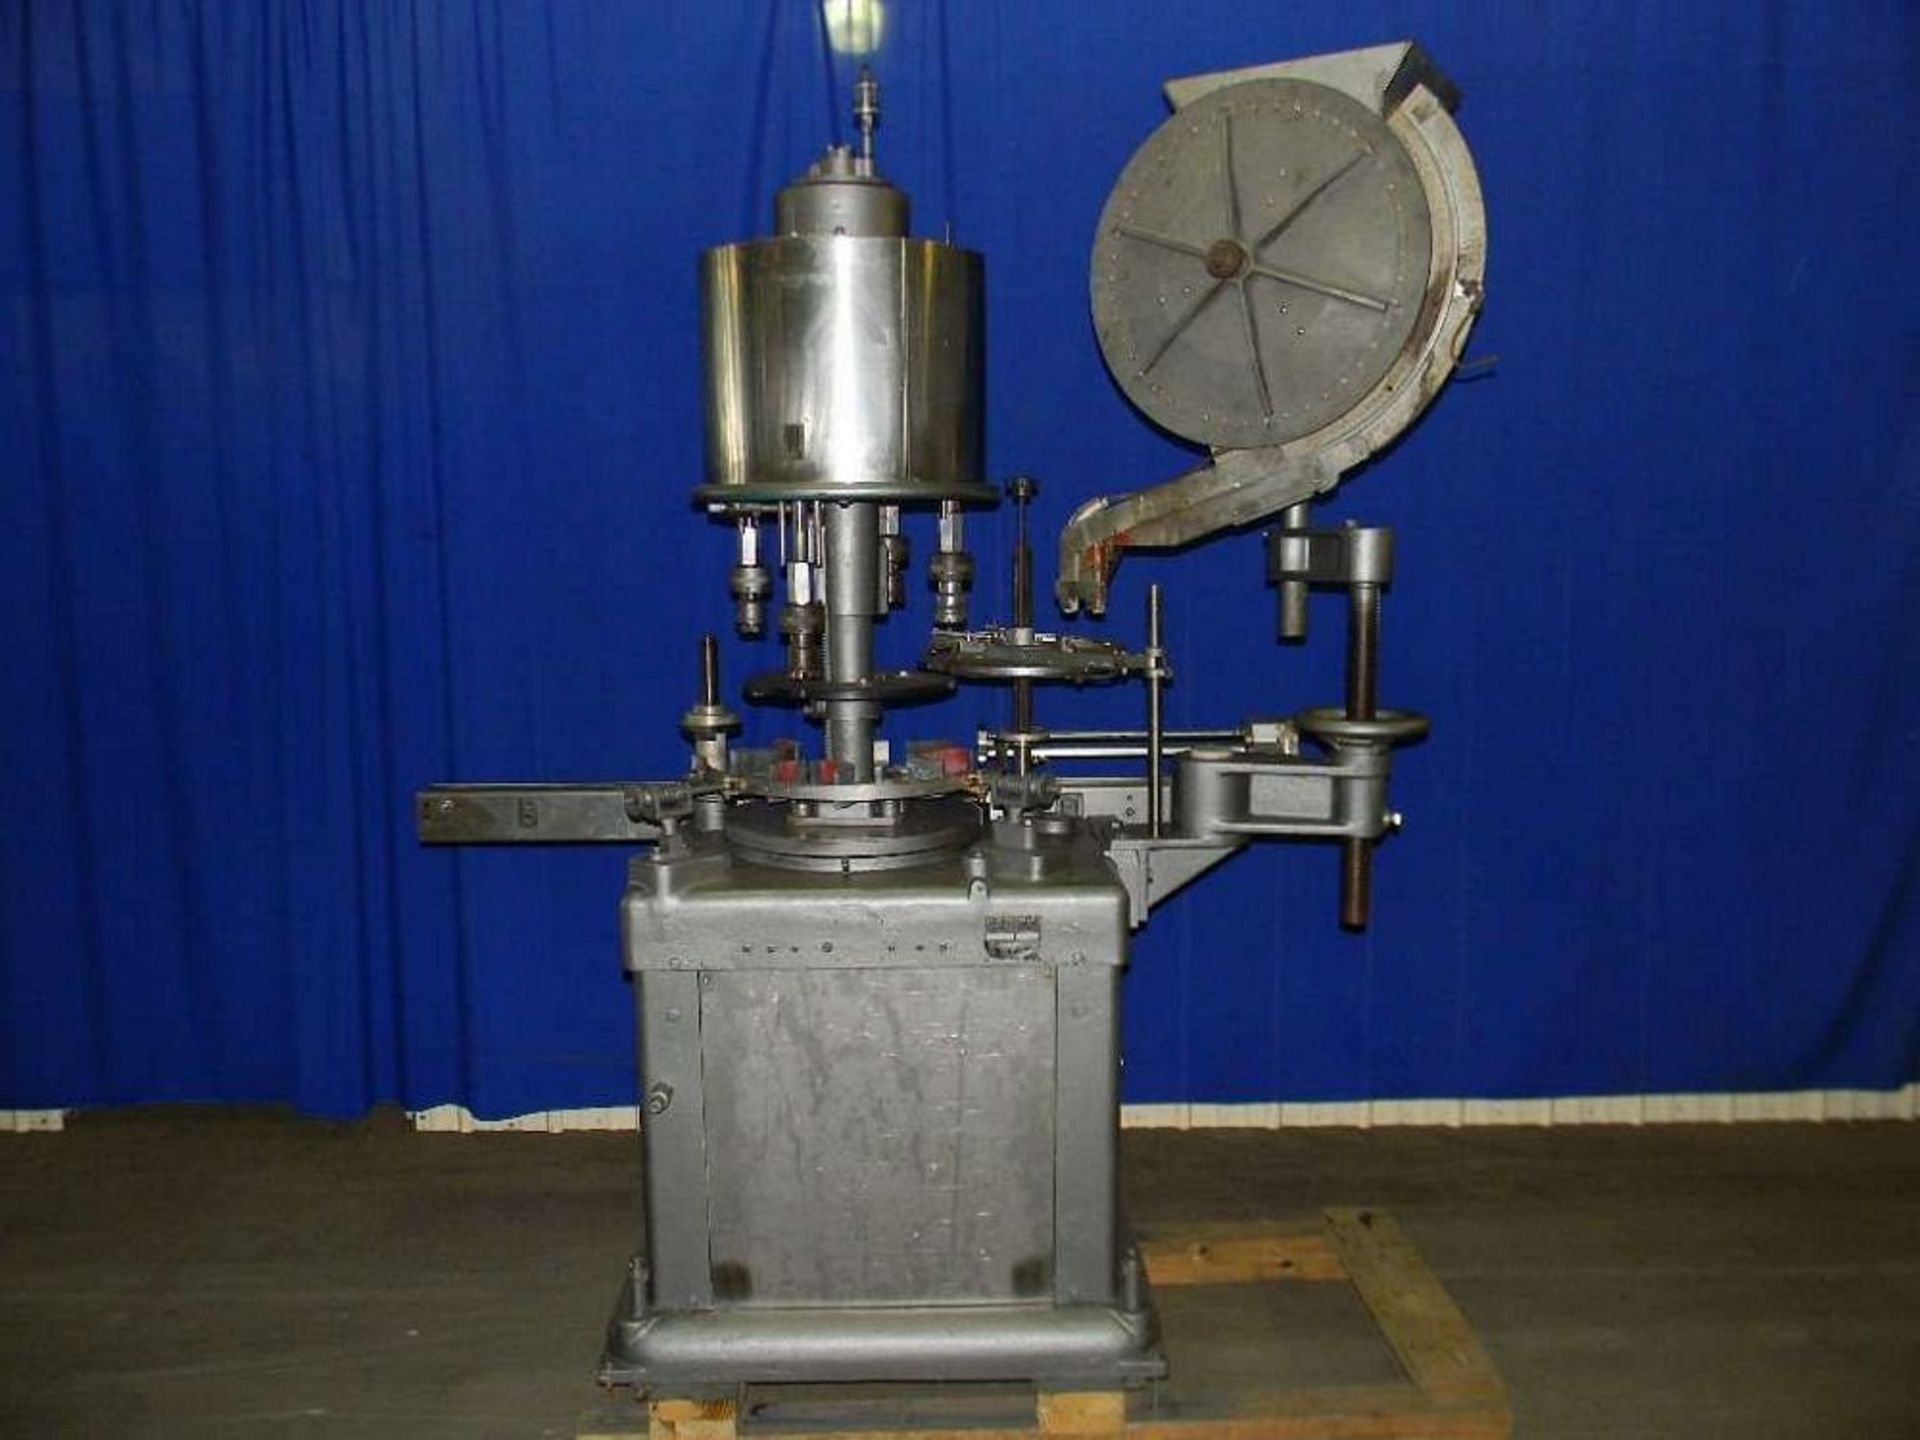 Qty (1) Consolidated D4FA 4 Head Rotary Screw Capper - Consolidated Model D4FA Rotary Screw Capper - - Image 3 of 5